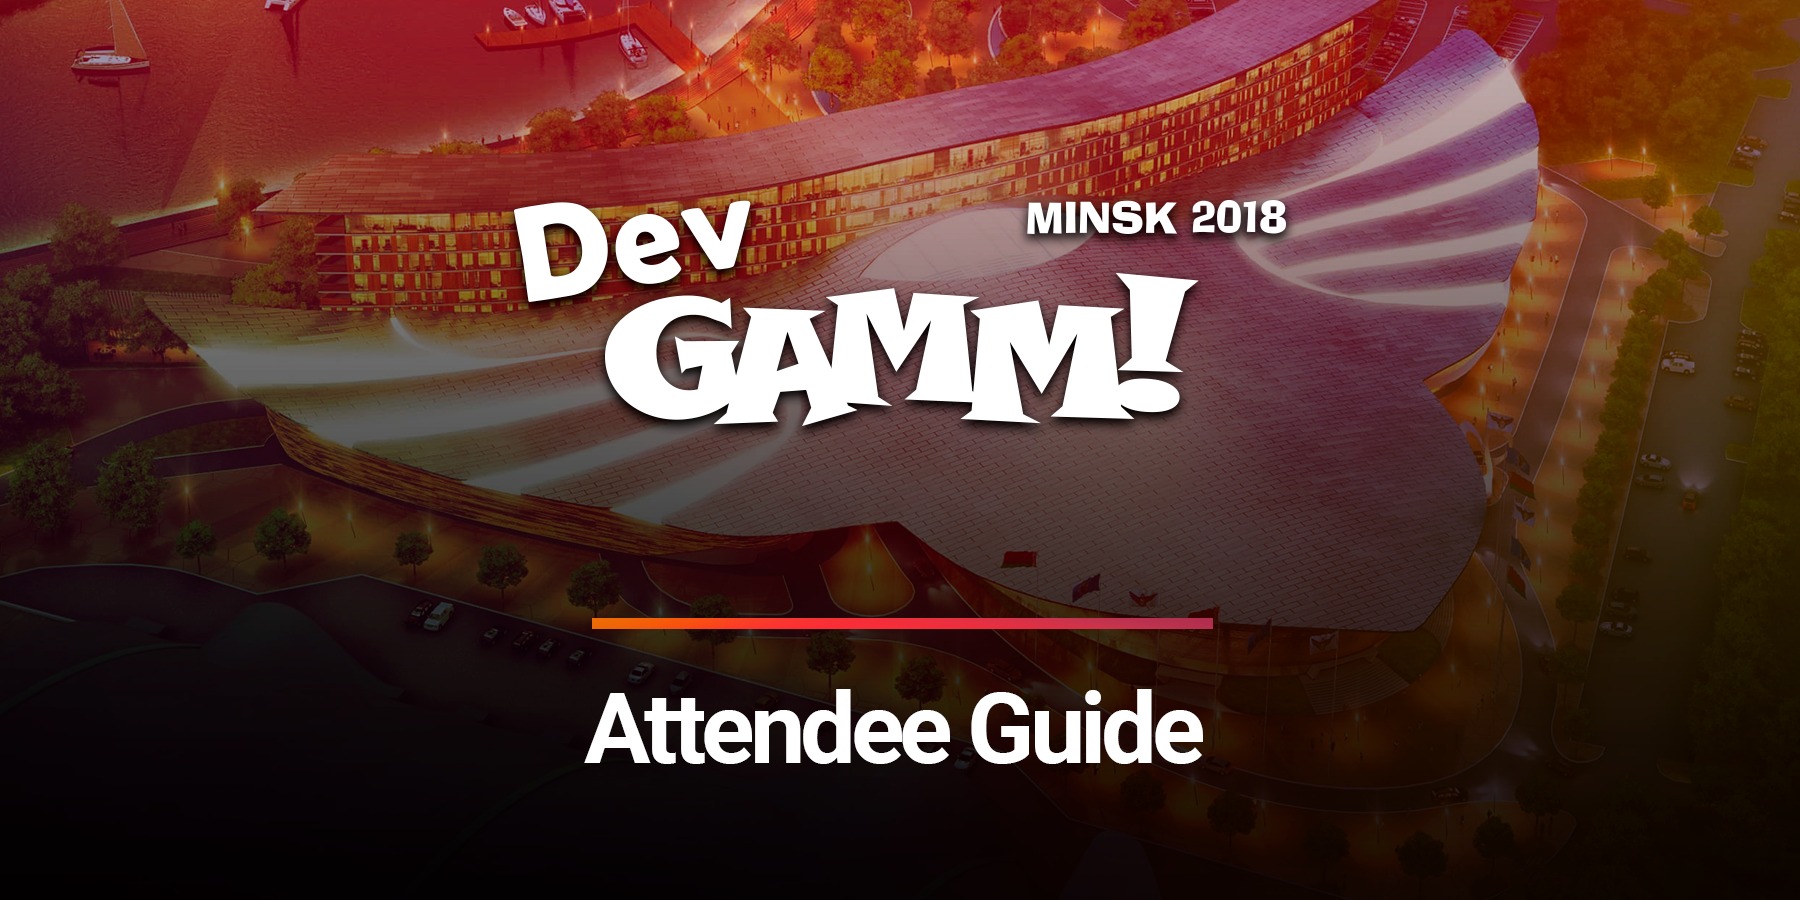 You are currently viewing Attendee Guide for DevGAMM Minsk 2018